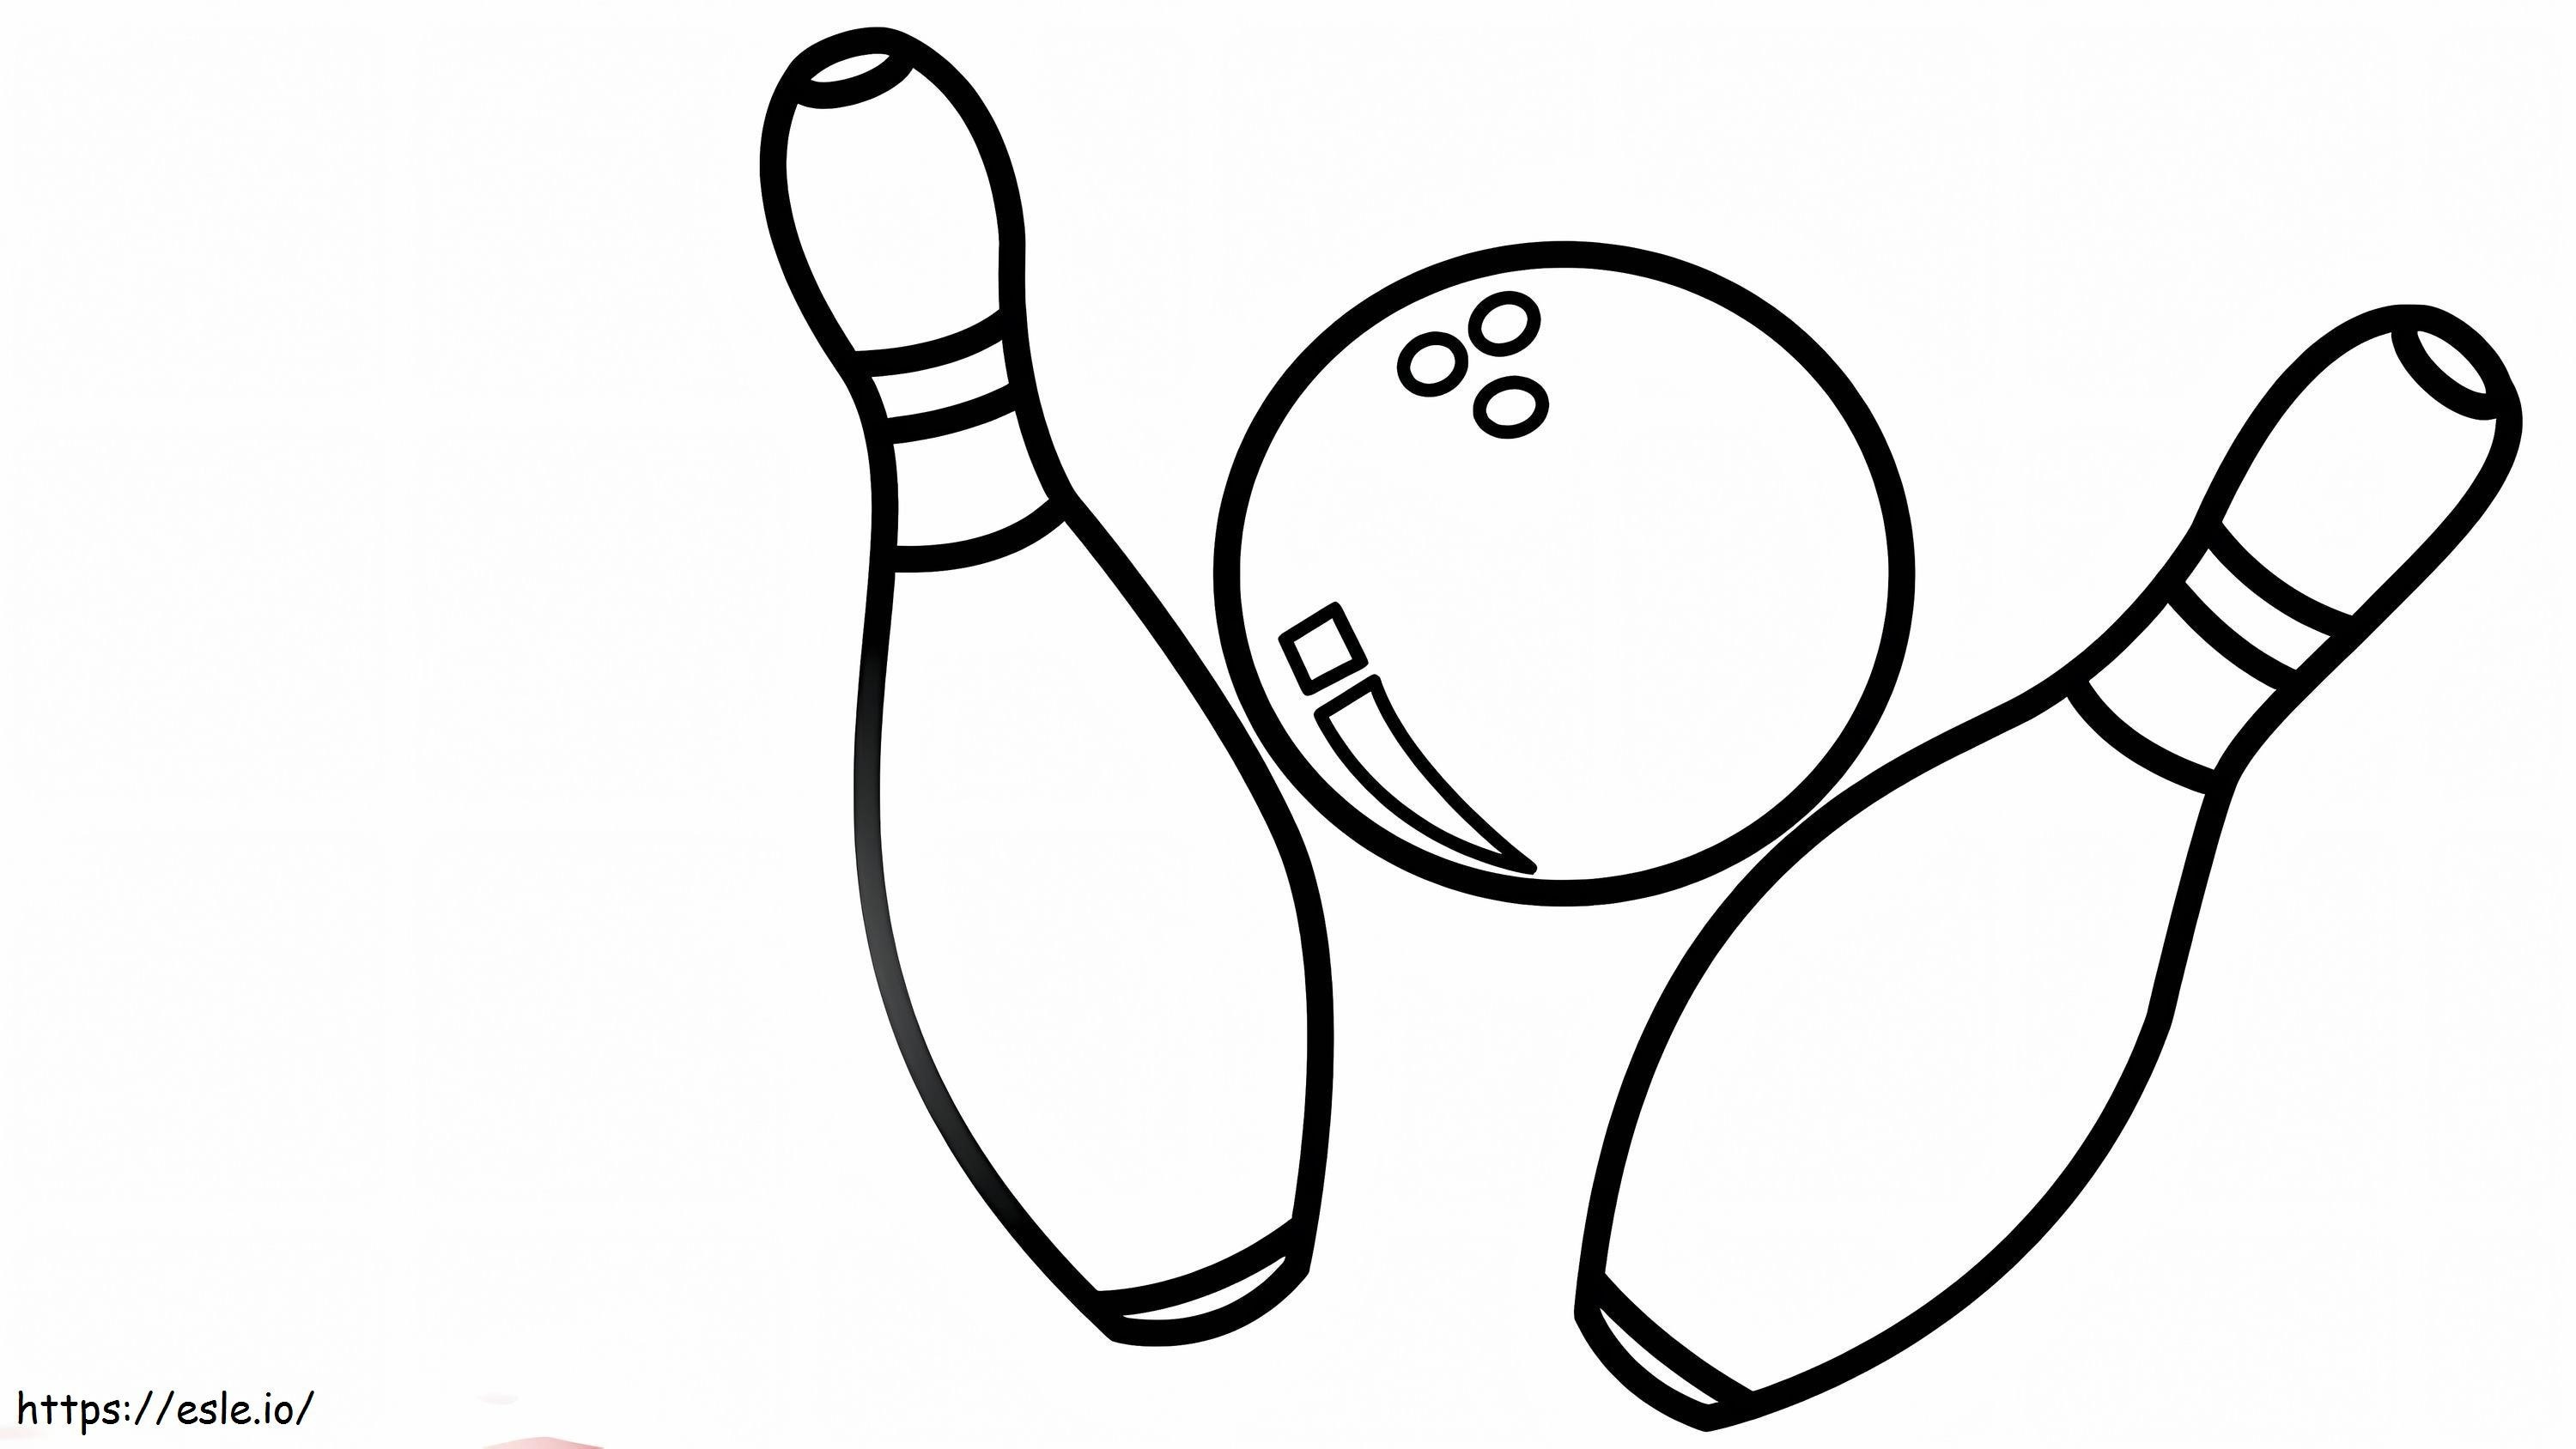 Regular Cakes coloring page